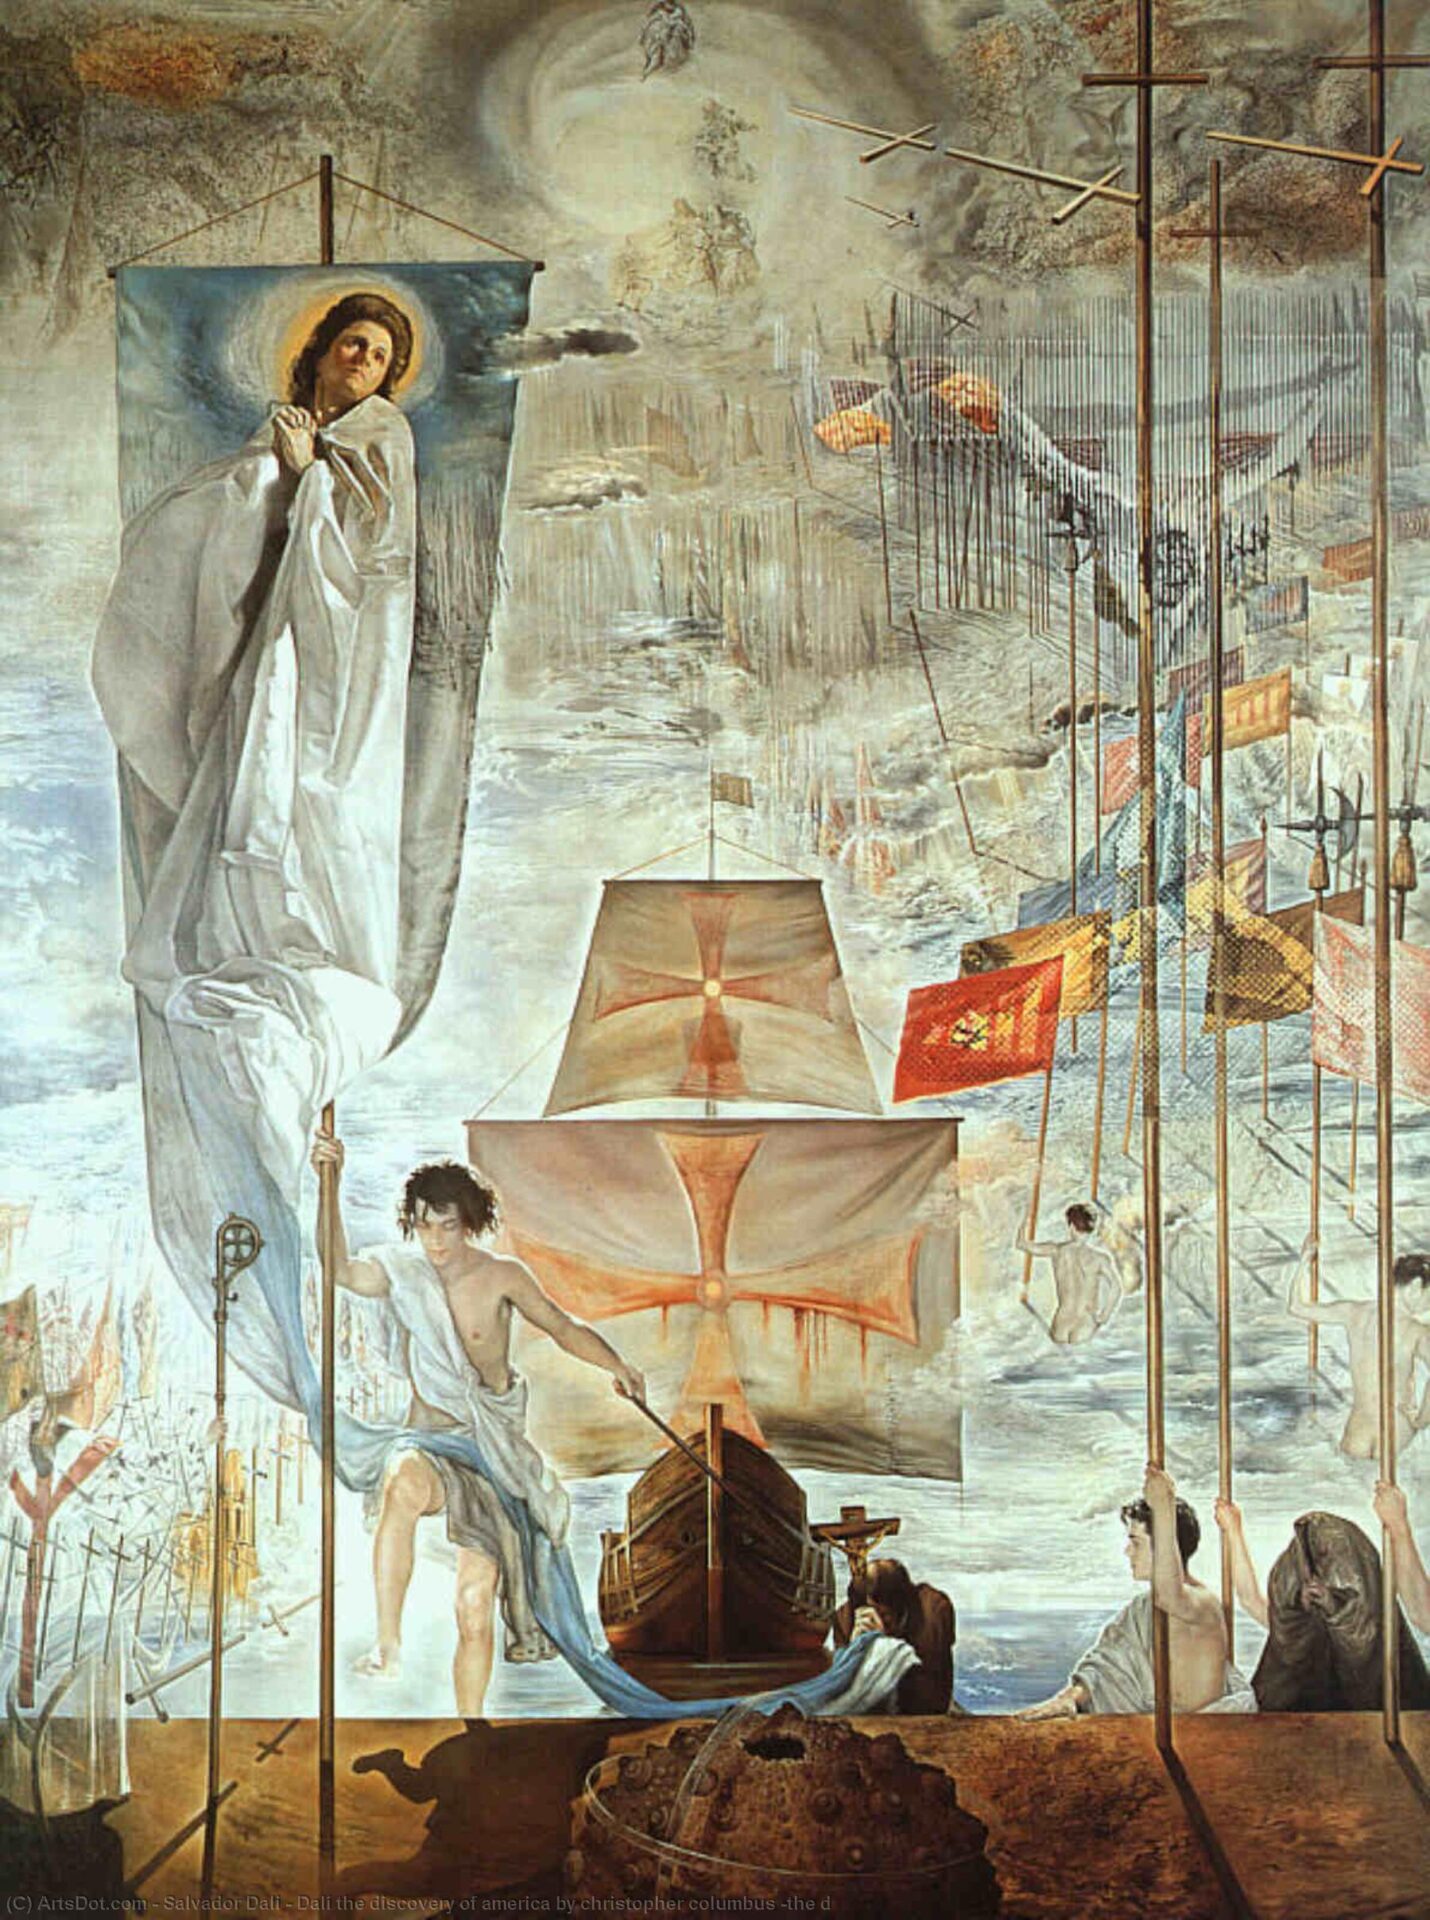 The Discovery of America by Christopher Columbus | Salvador Dali